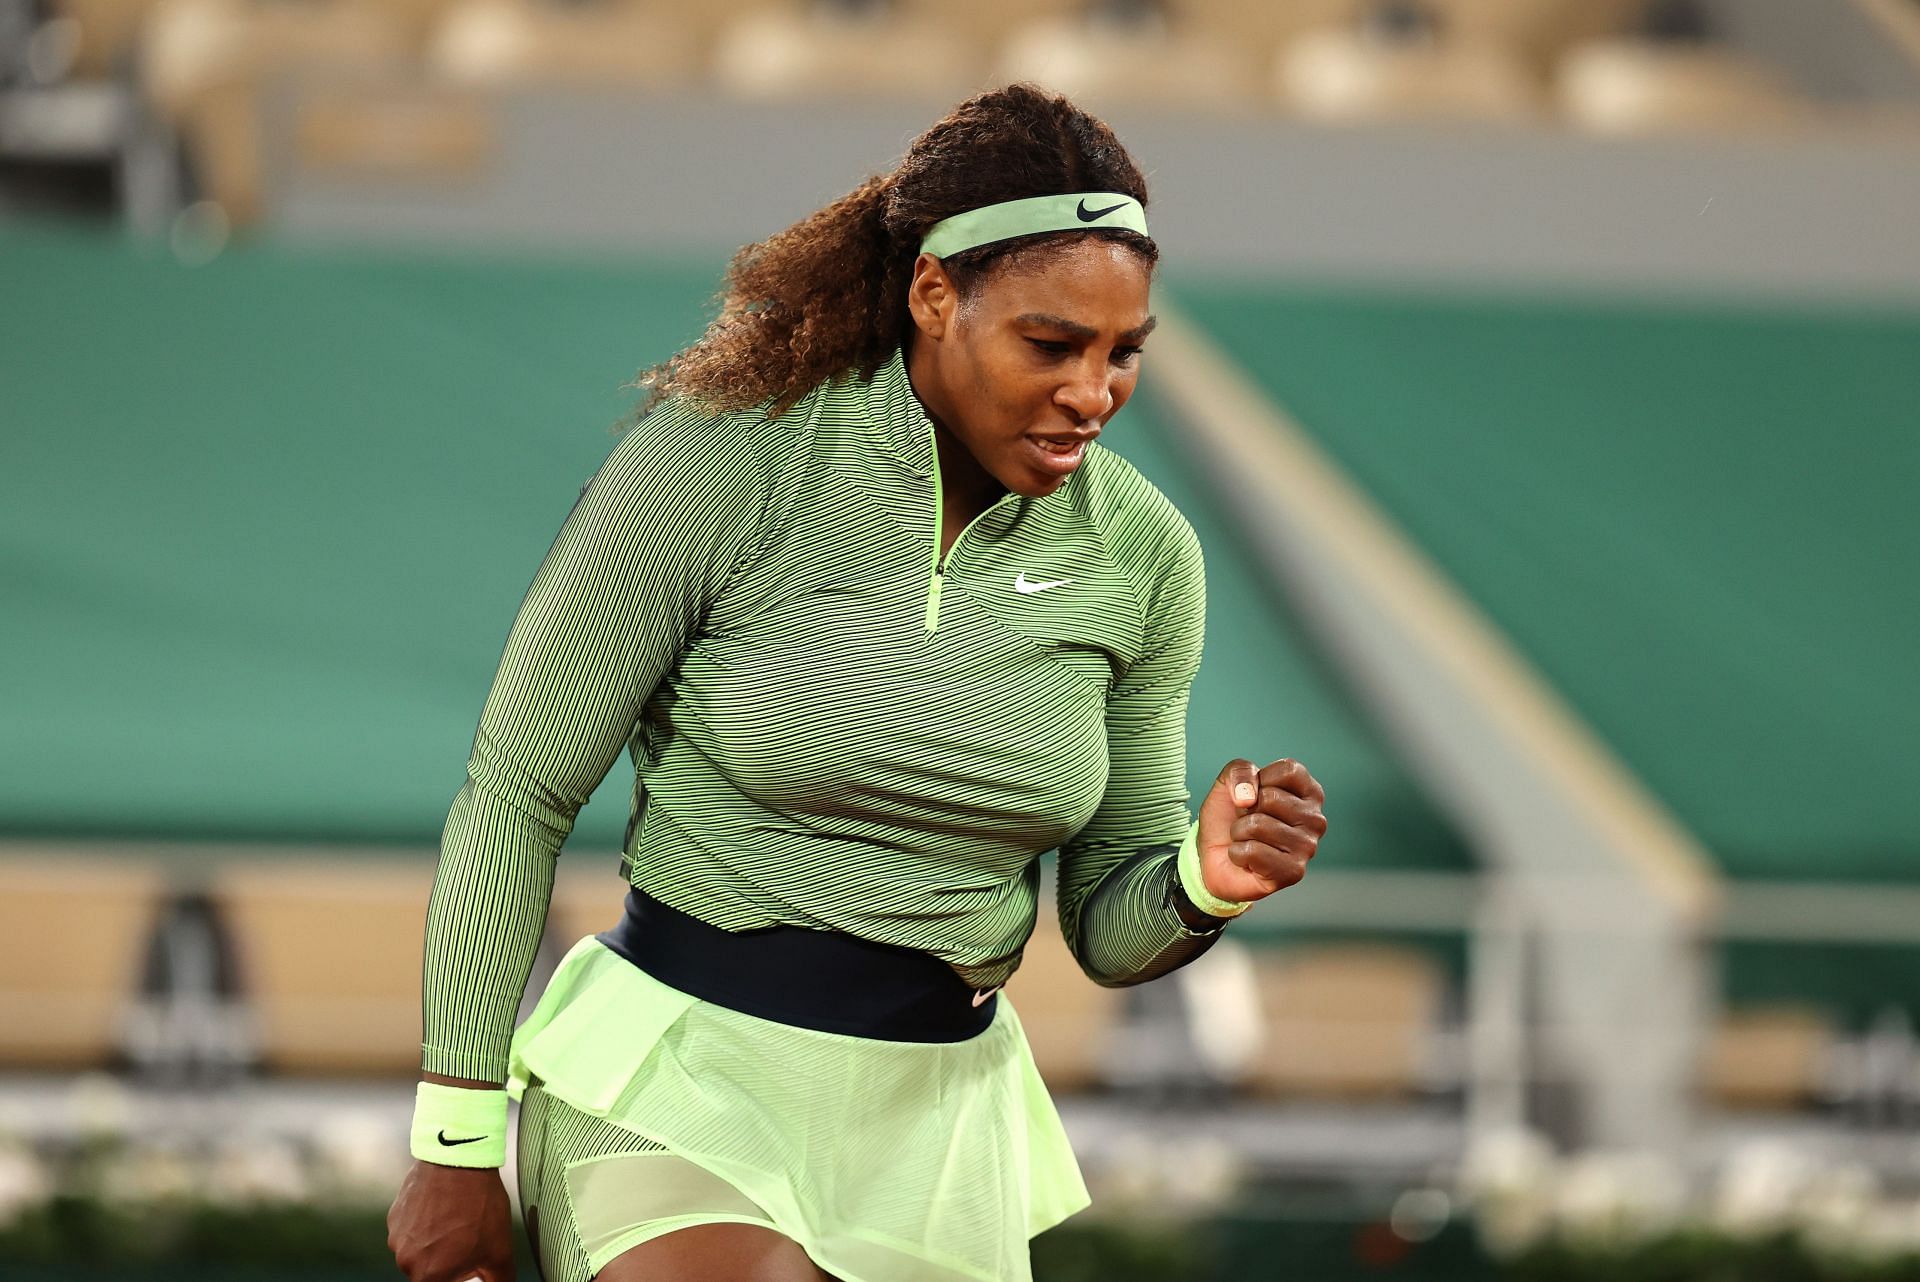 Serena Williams has not played since her first round match at the 2021 Wimbledon